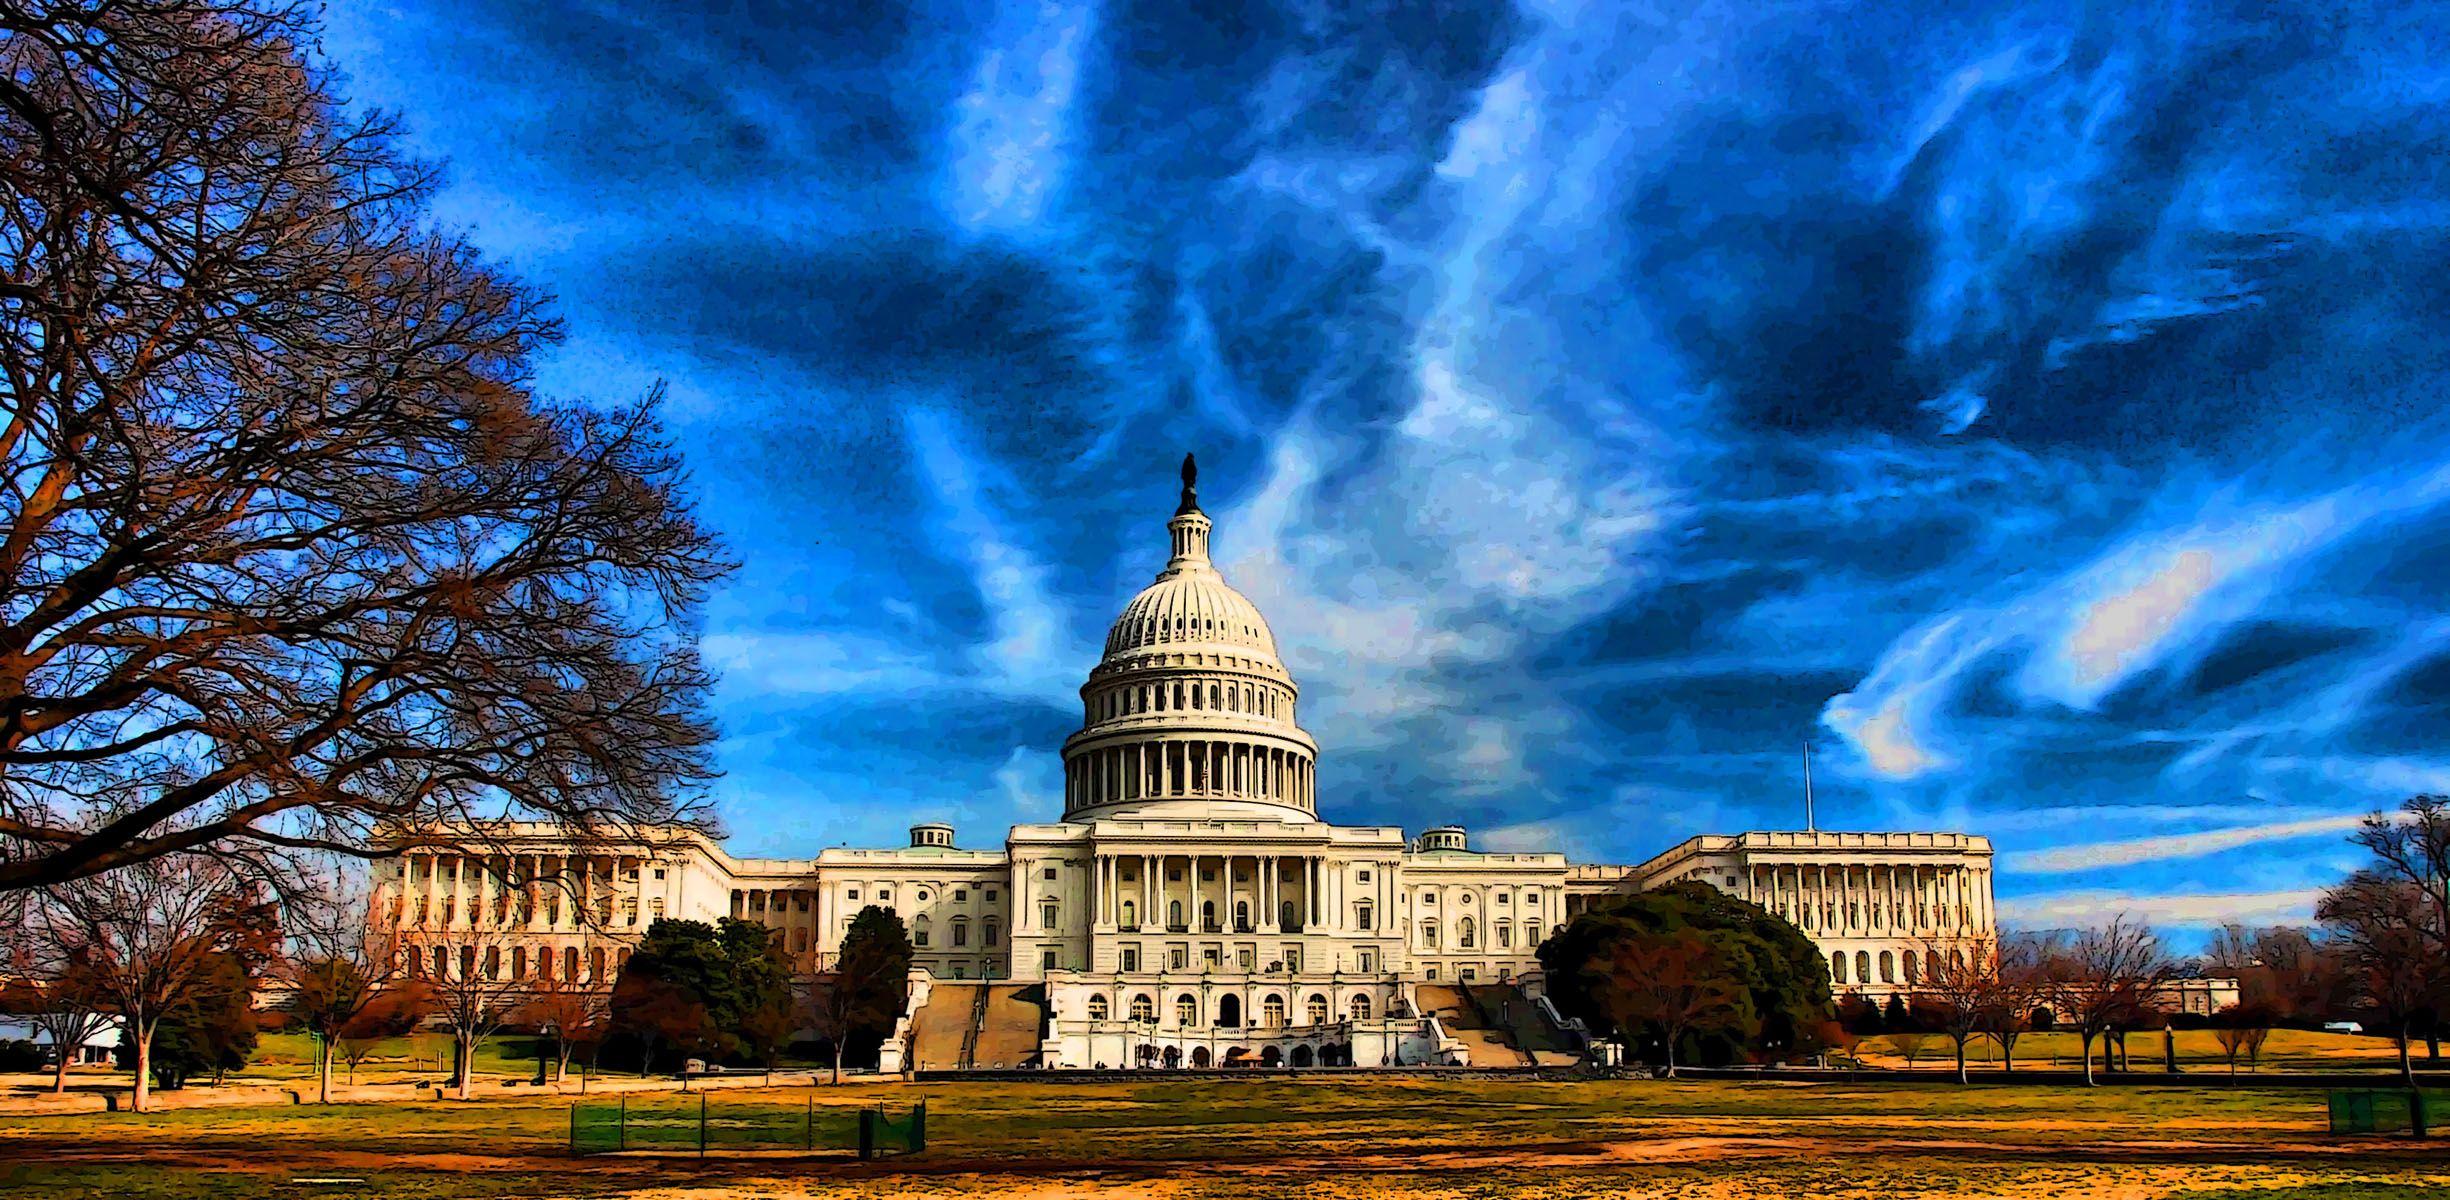 40 Washington wallpapers HD  Download Free backgrounds